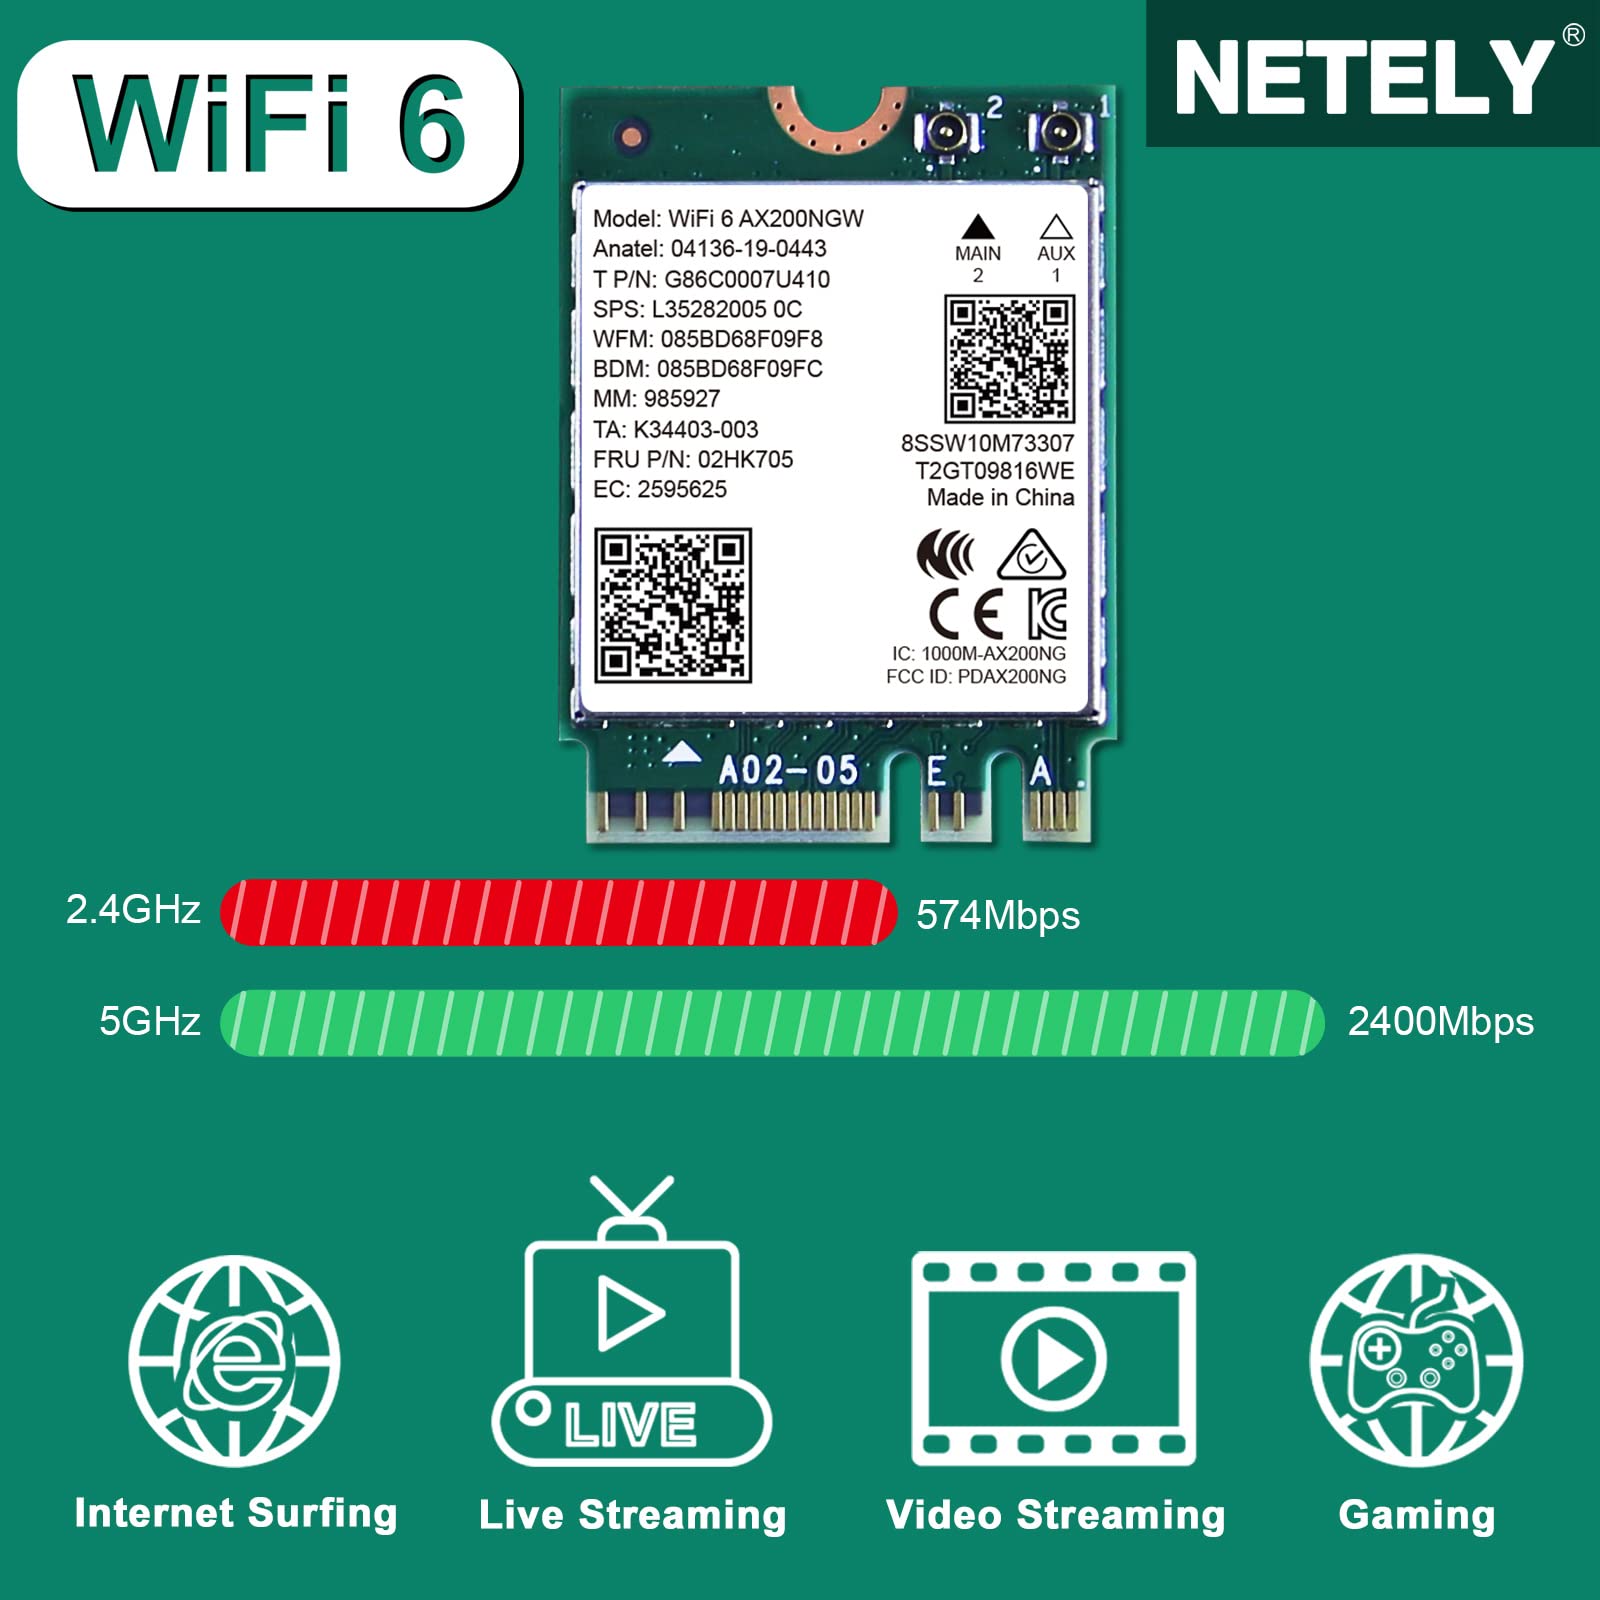 NETELY 802.11AX WiFi 6 AX200NGW MGFF M2 Interface WiFi Adapter with Bluetooth 5.0, WiFi 6 3000Mbps Speed, BT 5.0, 2.4GHz 574Mbps & 5GHz 2400Mbps, Intel WiFi 6 AX200NGW WiFi Card (WiFi 6 AX200NGW)